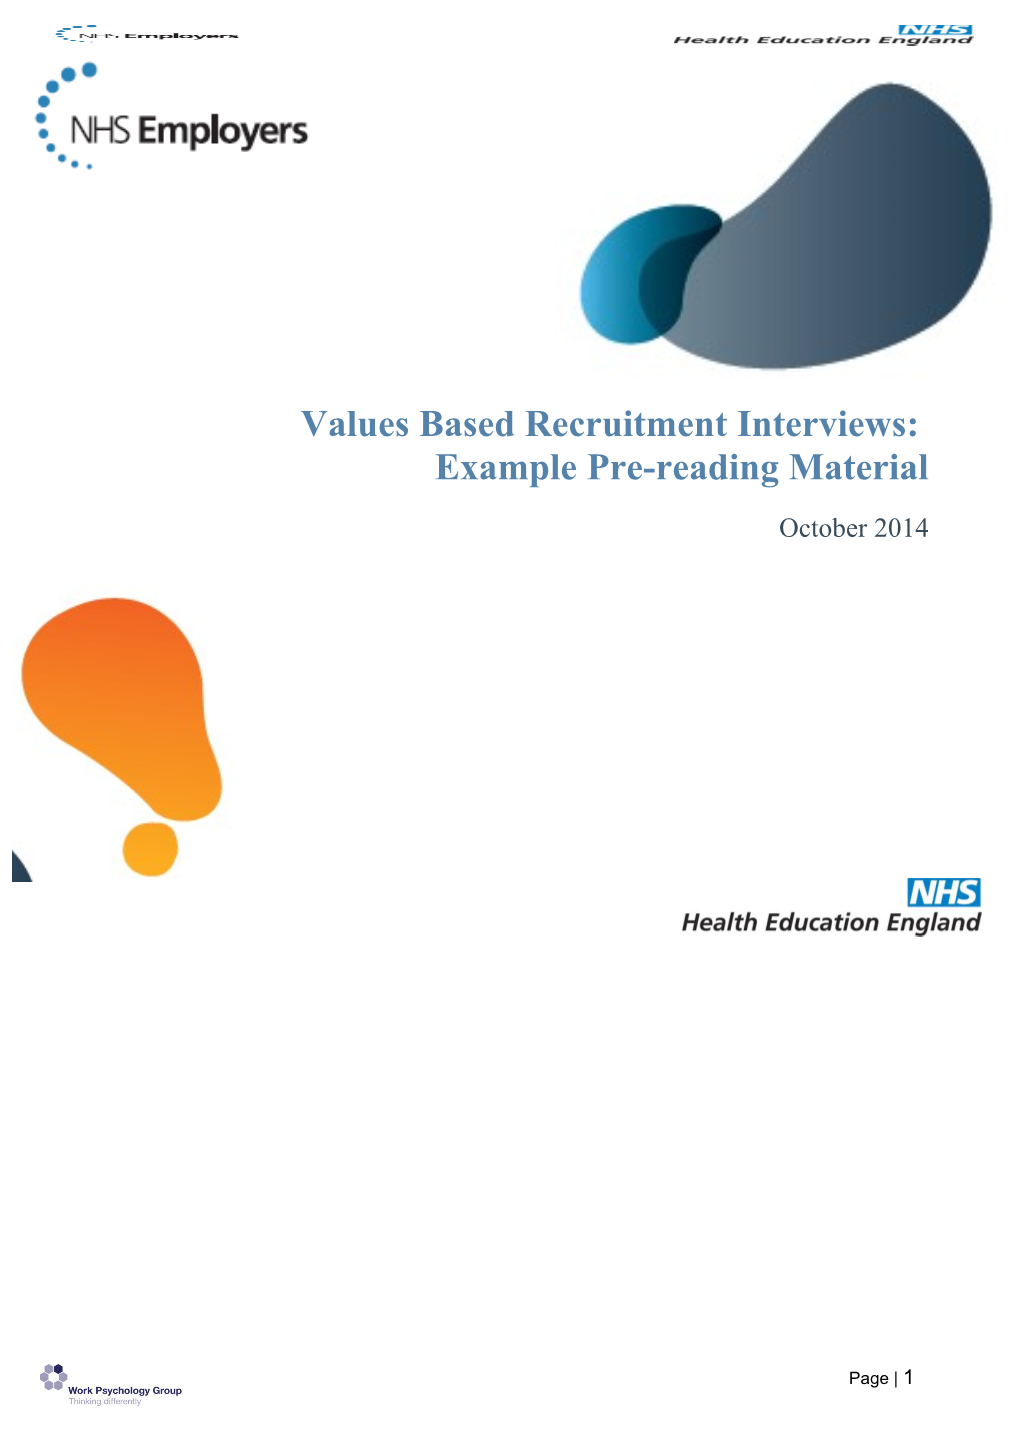 Values Based Recruitment Interviews